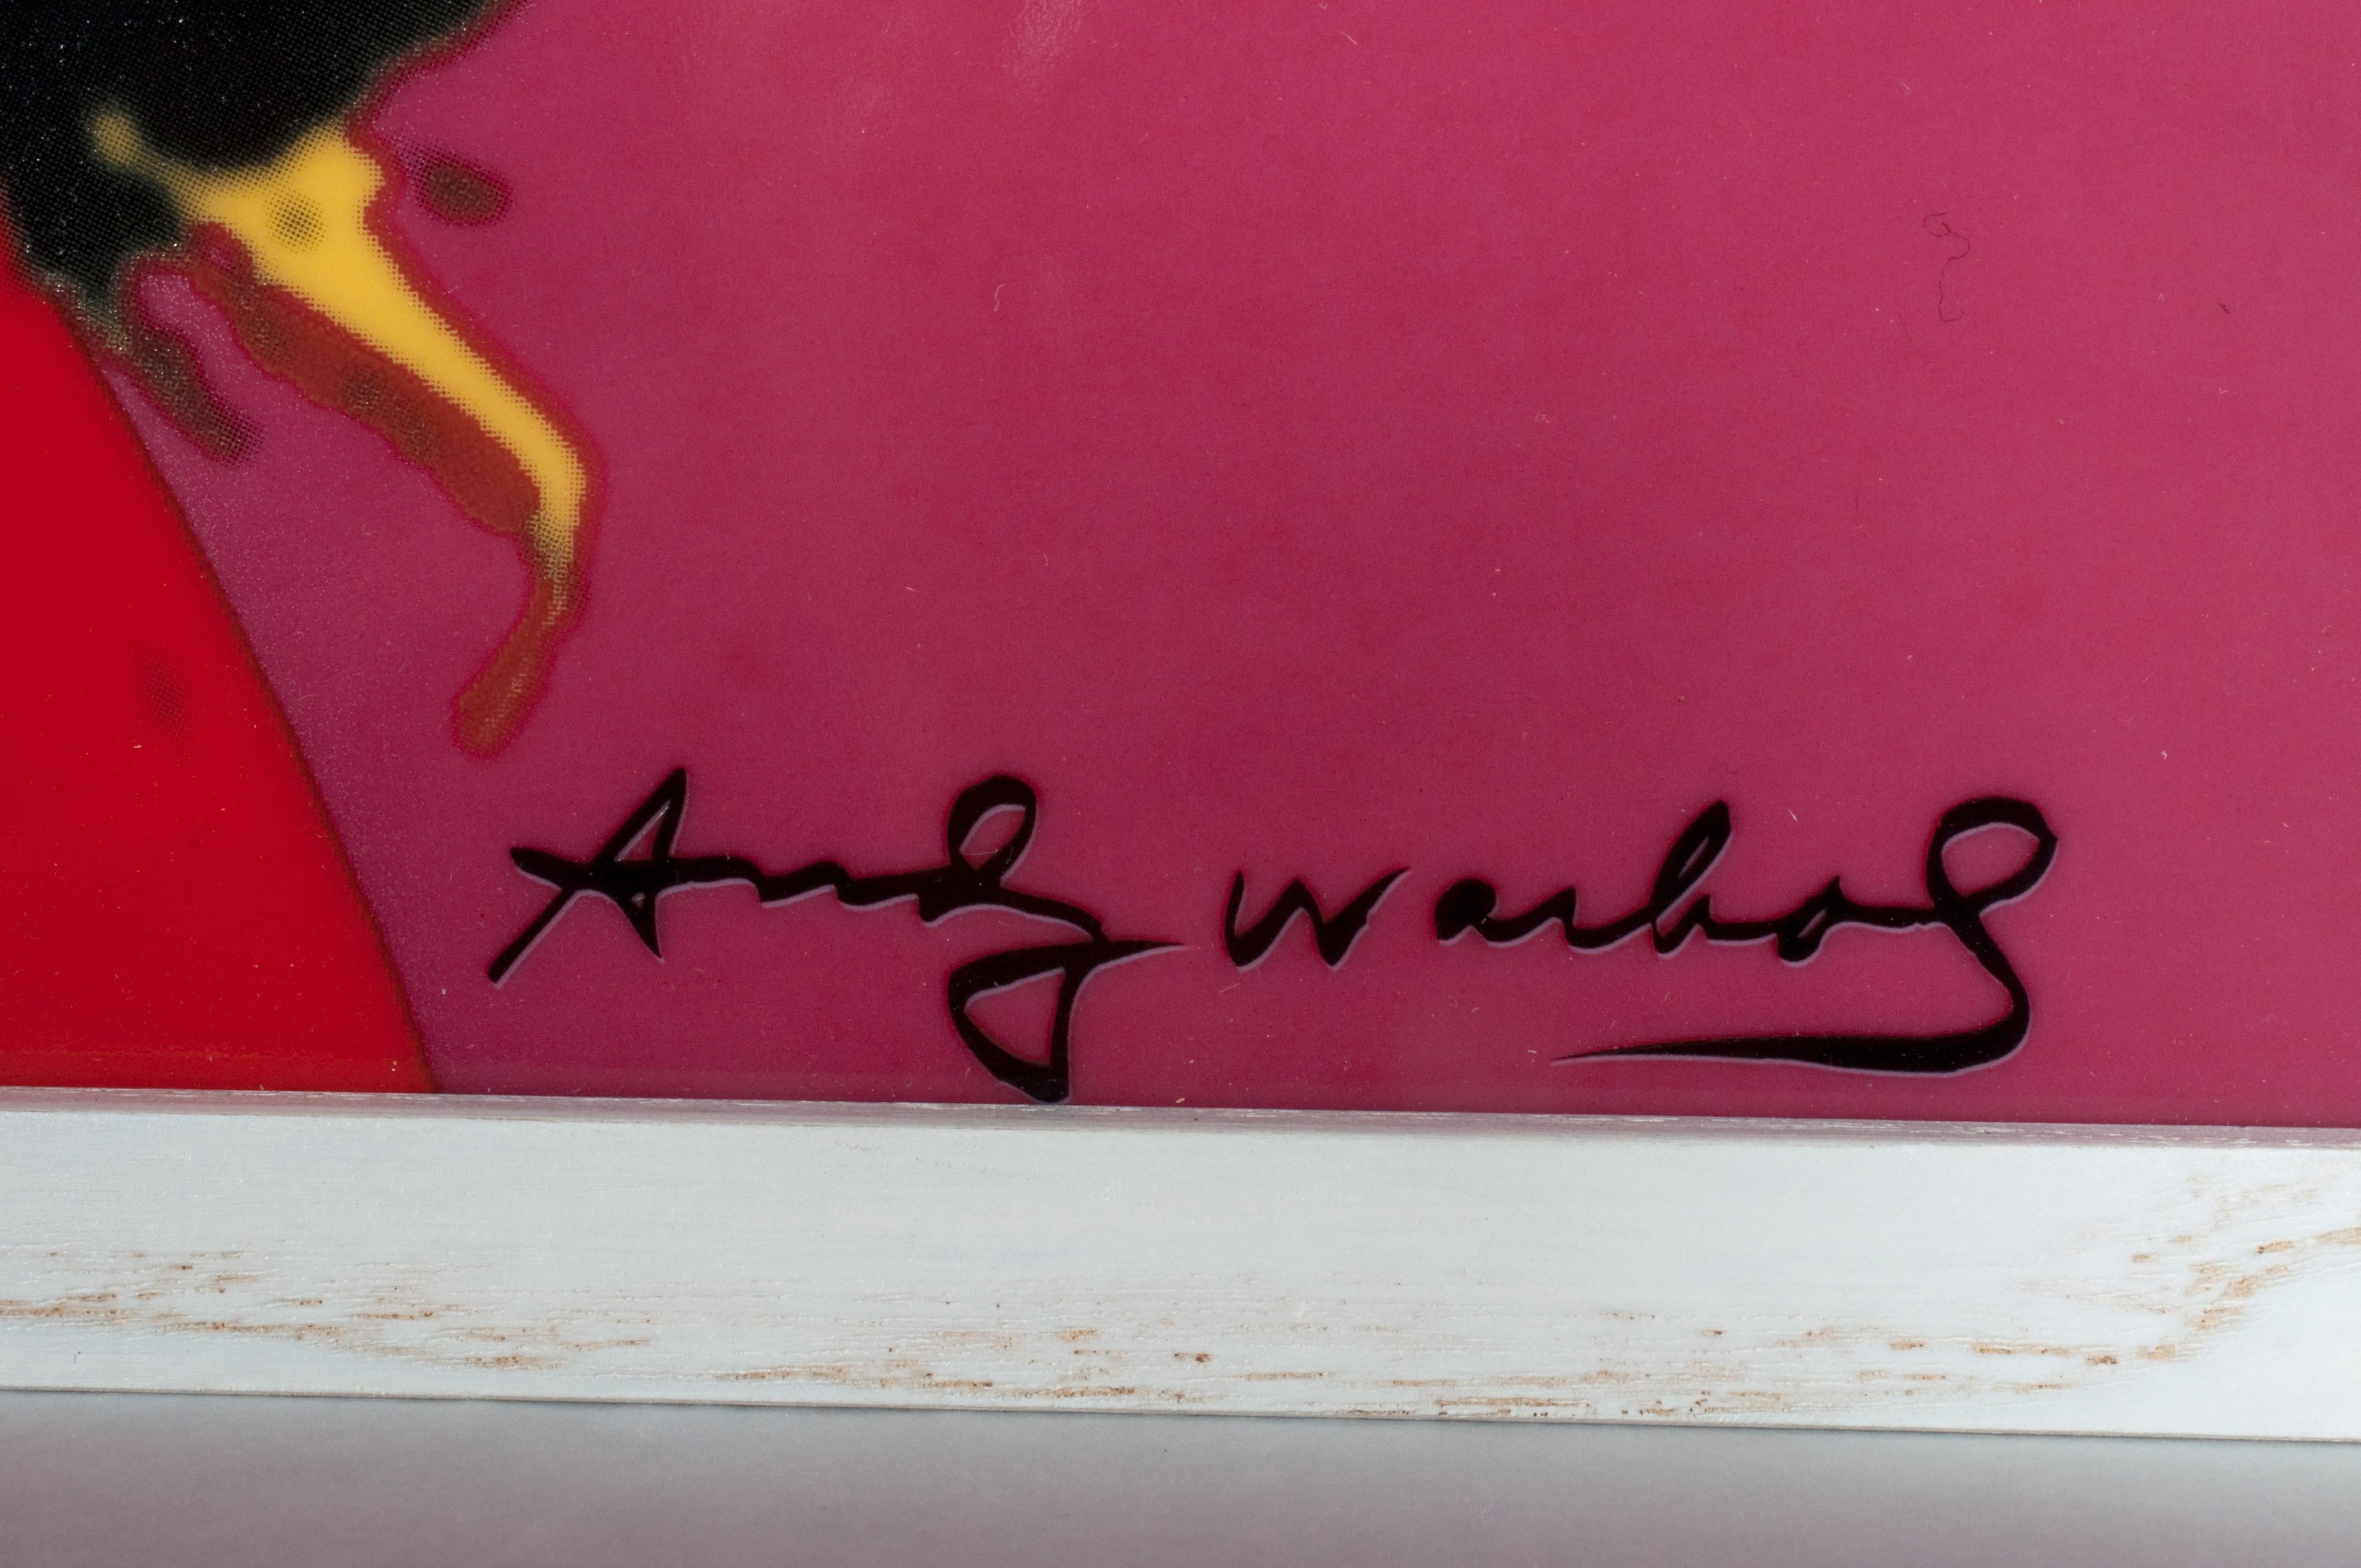 ANDY WARHOL
Marilyn Pink, 2010
Porcelain
Edition of 49
51 x 51 cm (20.1 x 20.1 in.)
Facsimile signature in glaze, numbered on the reverse on label In wooden box, accompanied by Certificate of Authenticity from the Rosenthal Studio in collaboration